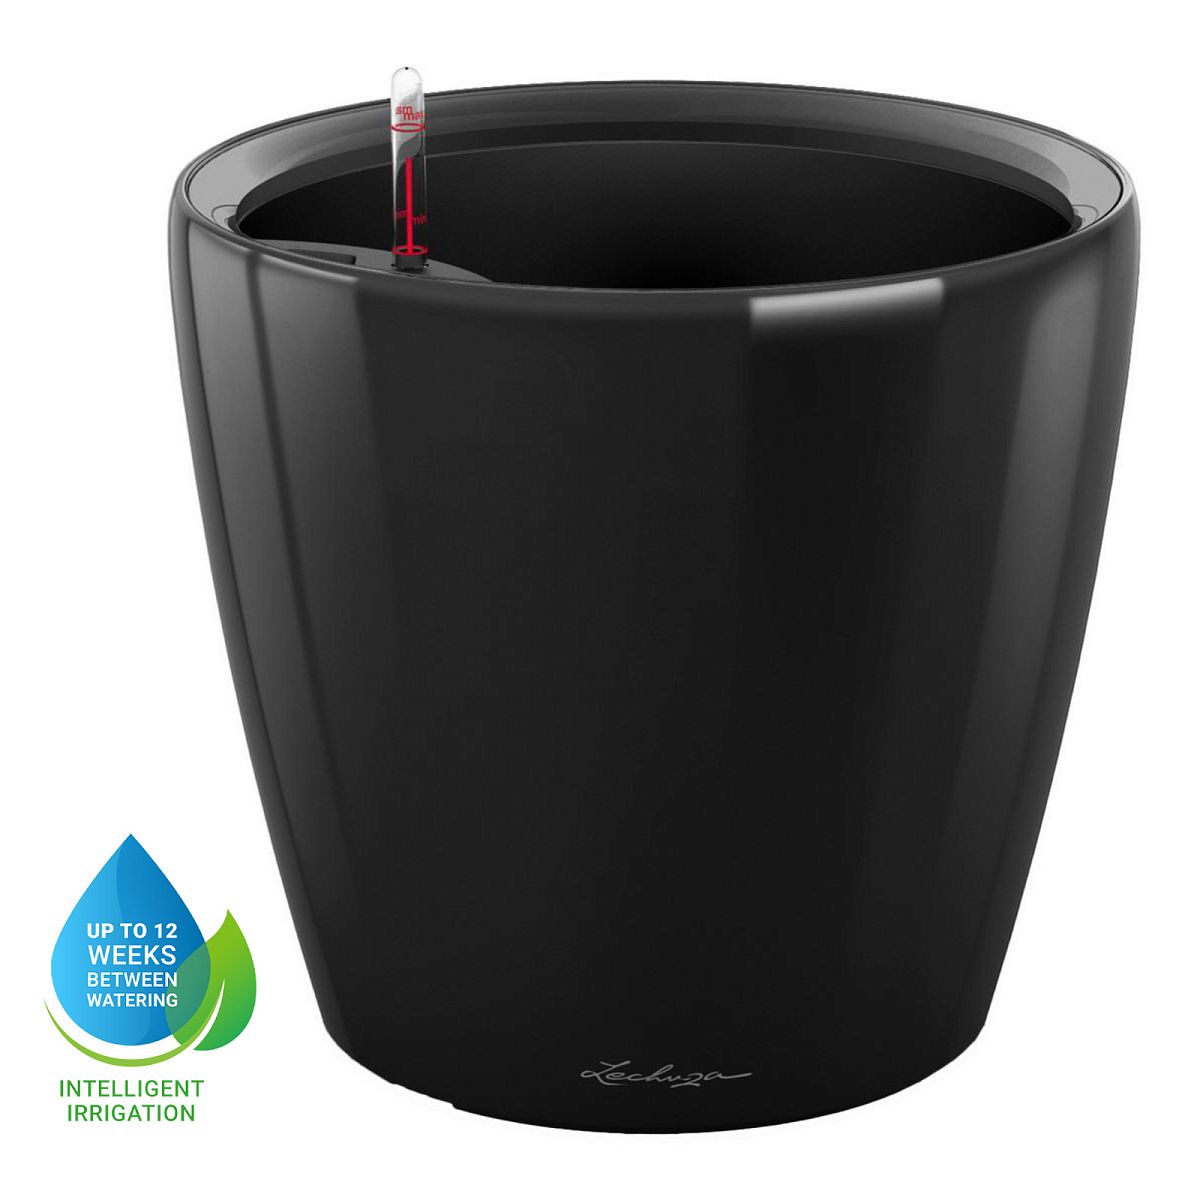 LECHUZA CLASSICO LS Round Poly Resin Self-watering Planter